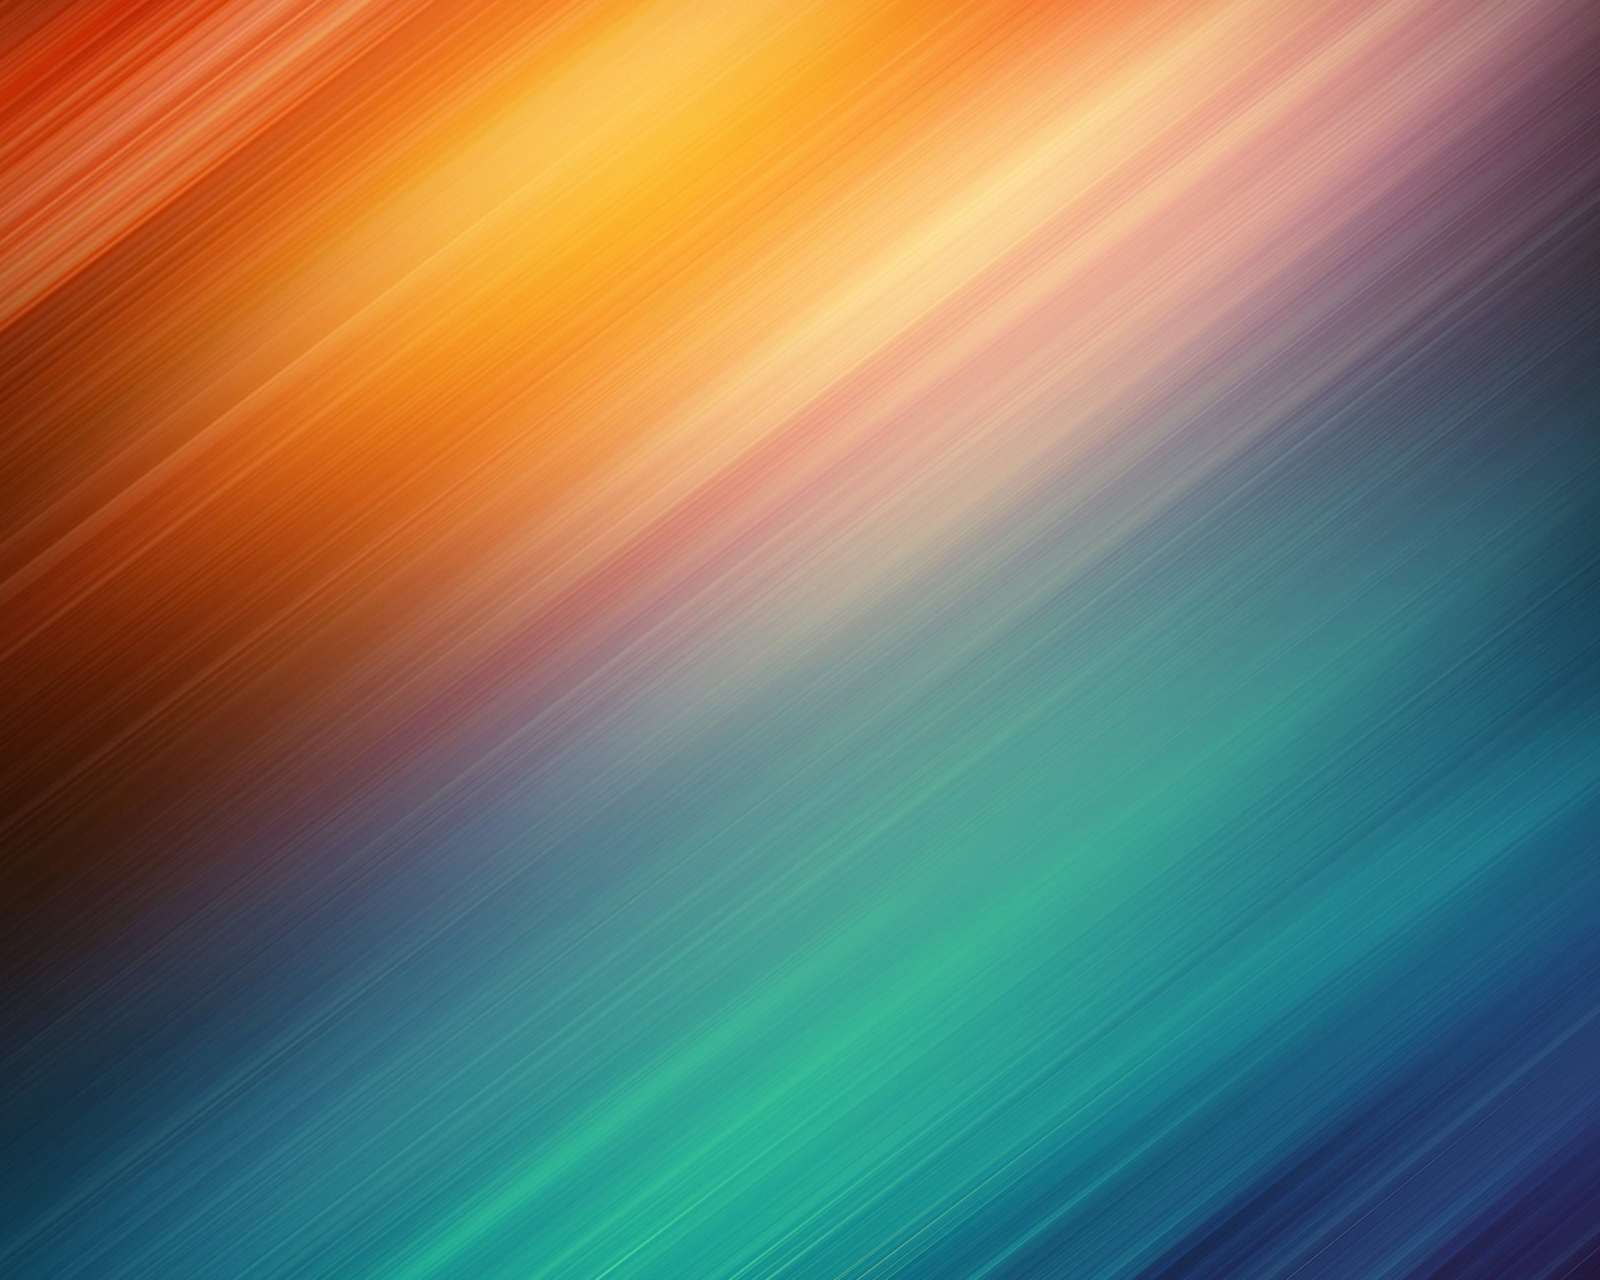 Graphic Design Background Wallpaper For Samsung Galaxy Tab